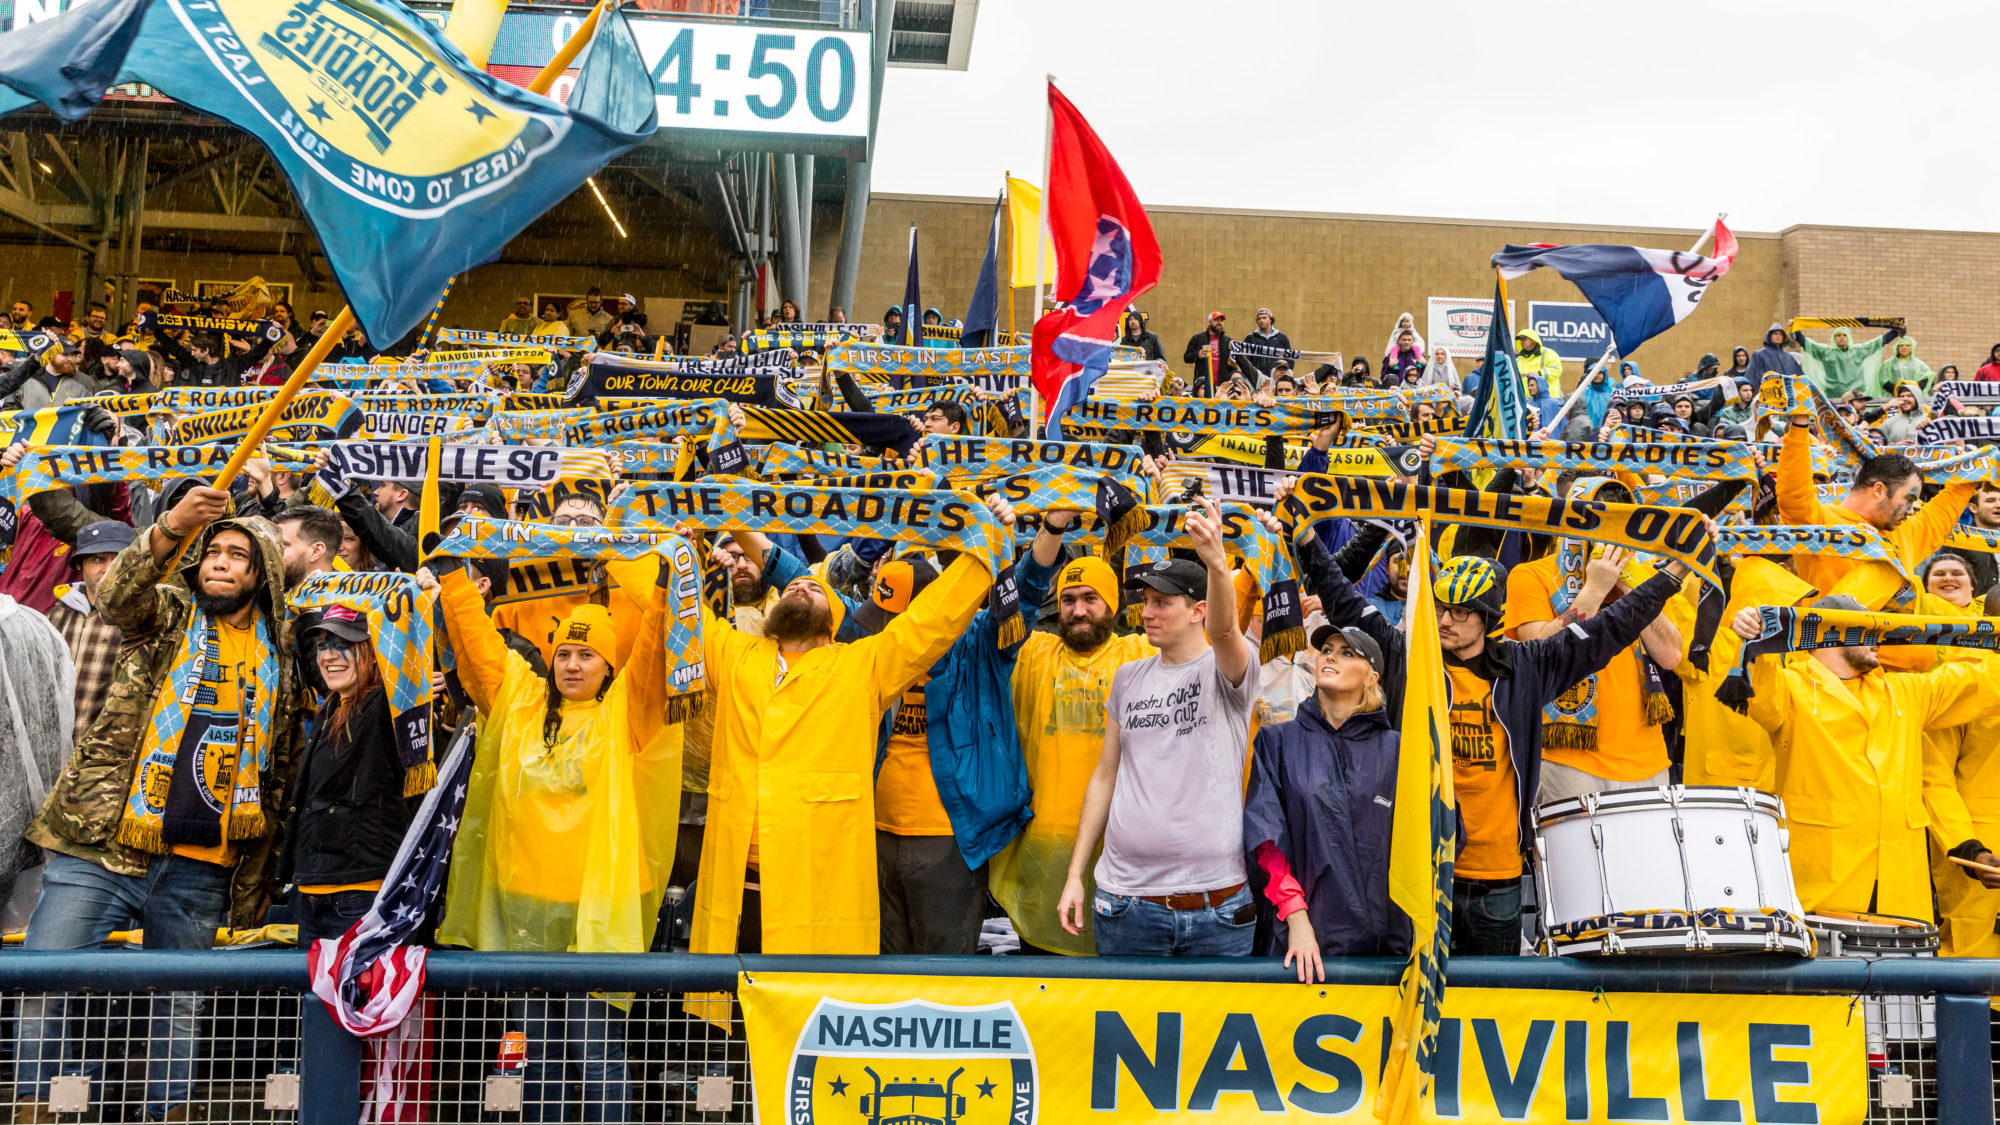 We Represent - The Roadies  Nashville SC Supporters Group